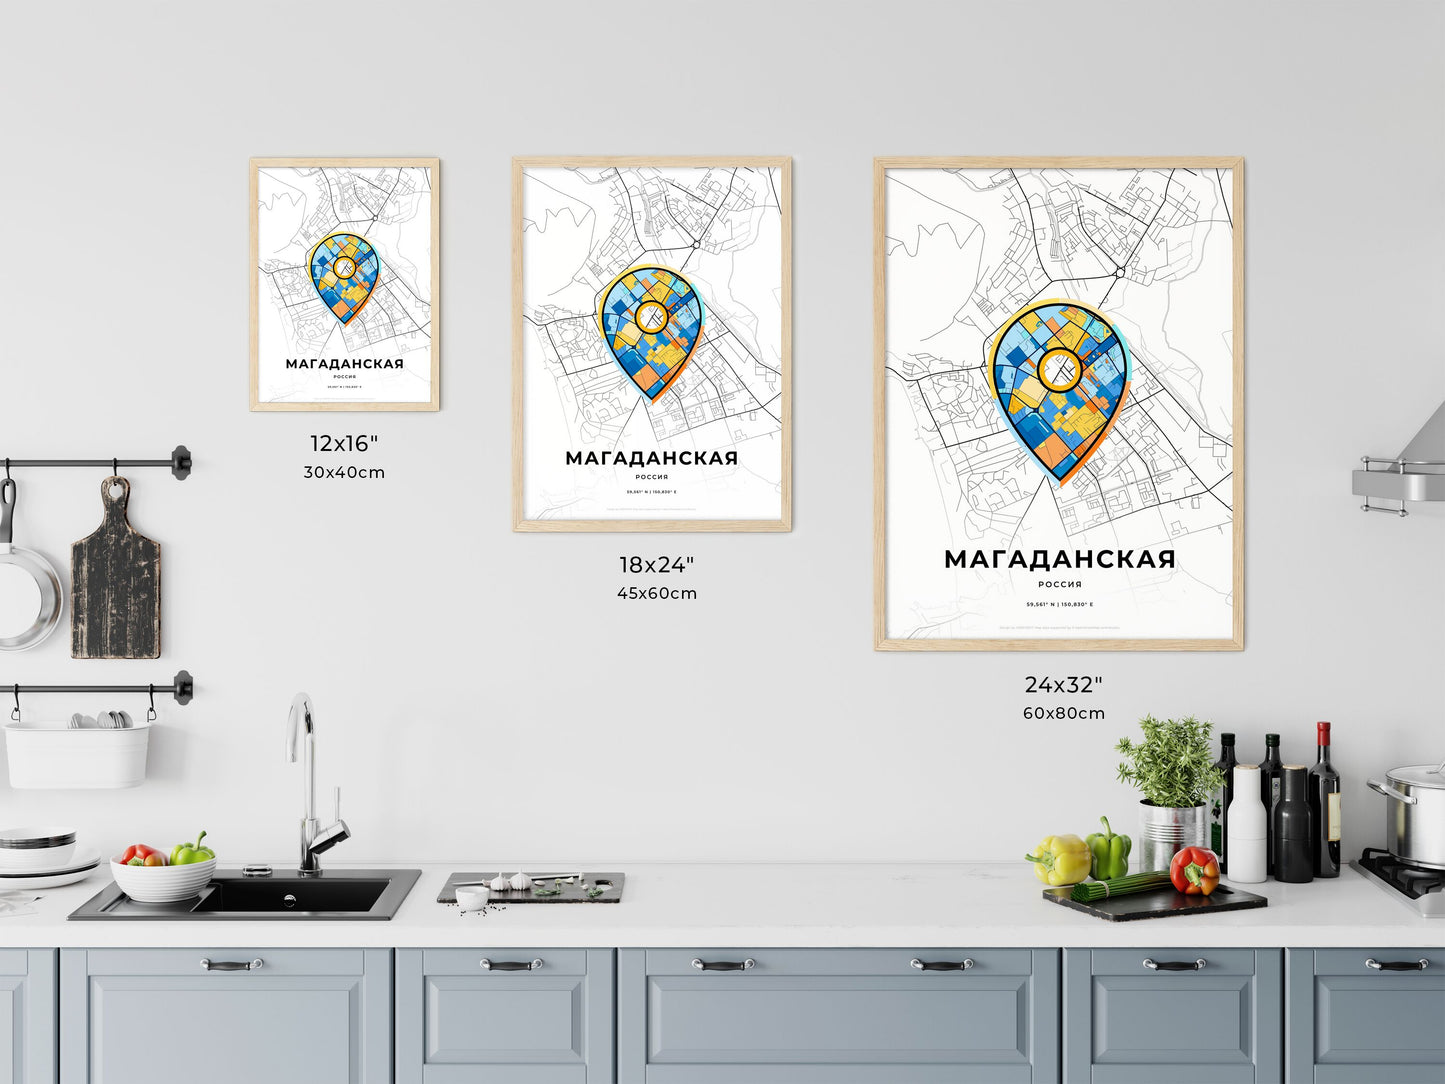 MAGADAN RUSSIA minimal art map with a colorful icon. Where it all began, Couple map gift.